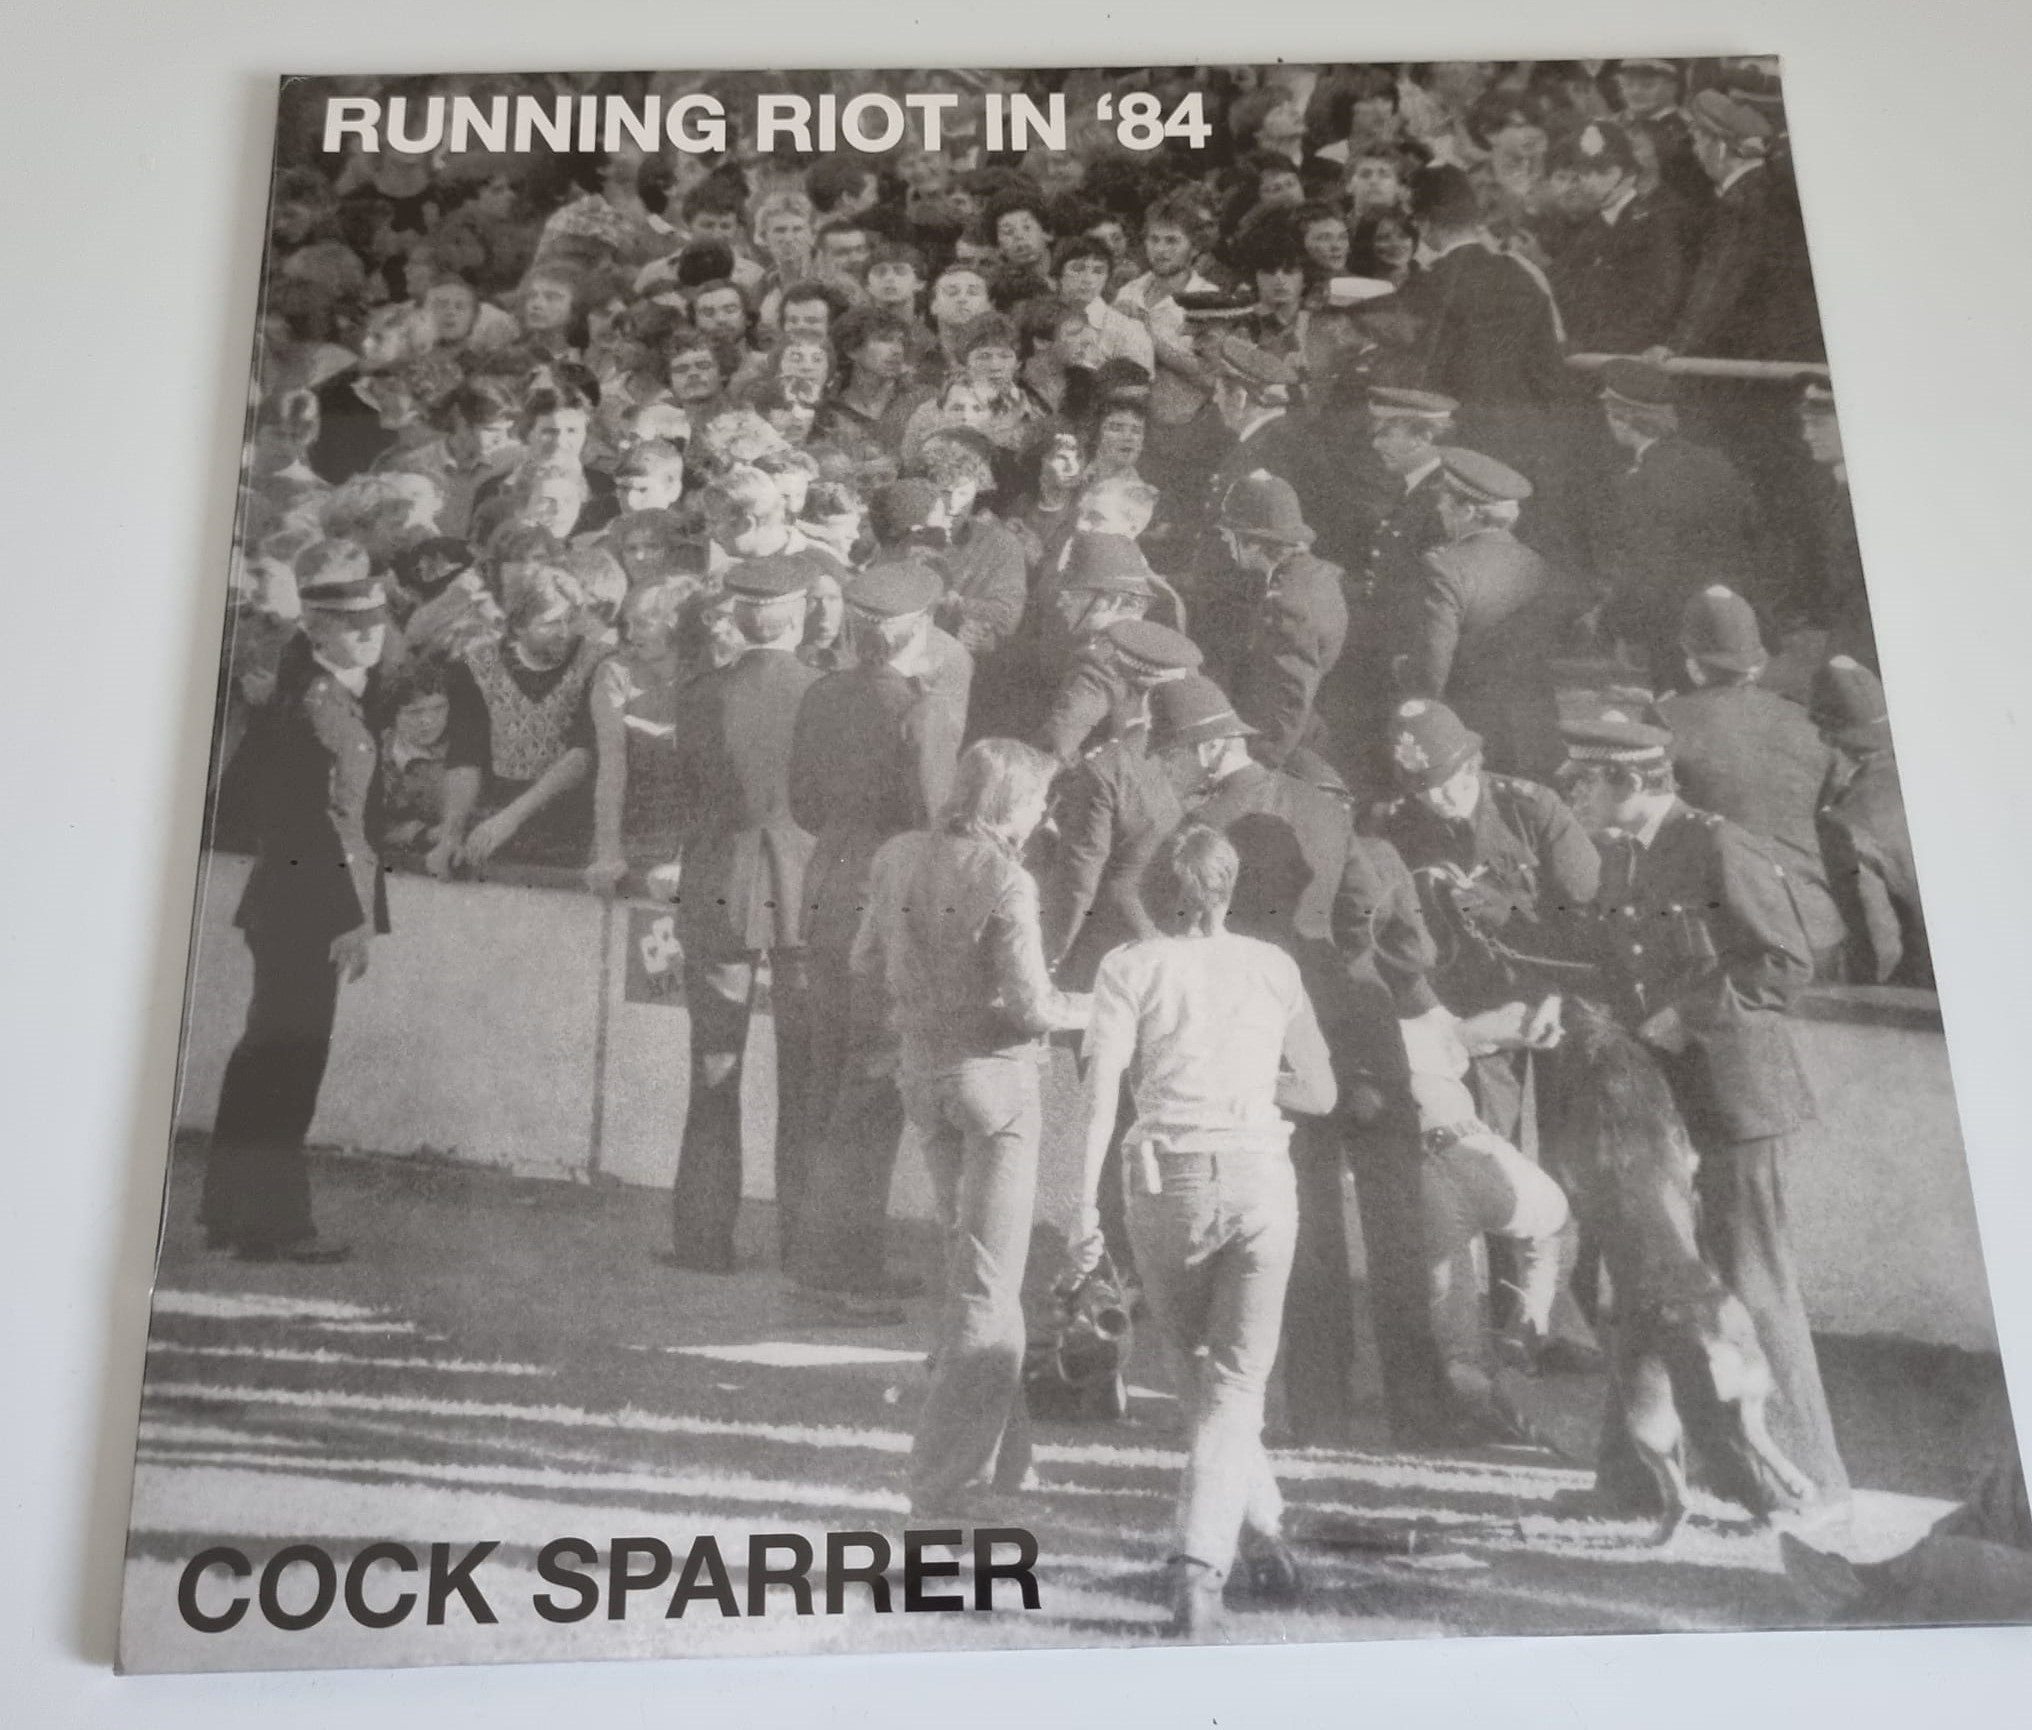 Buy this rare Cock Sparrer record by clicking here